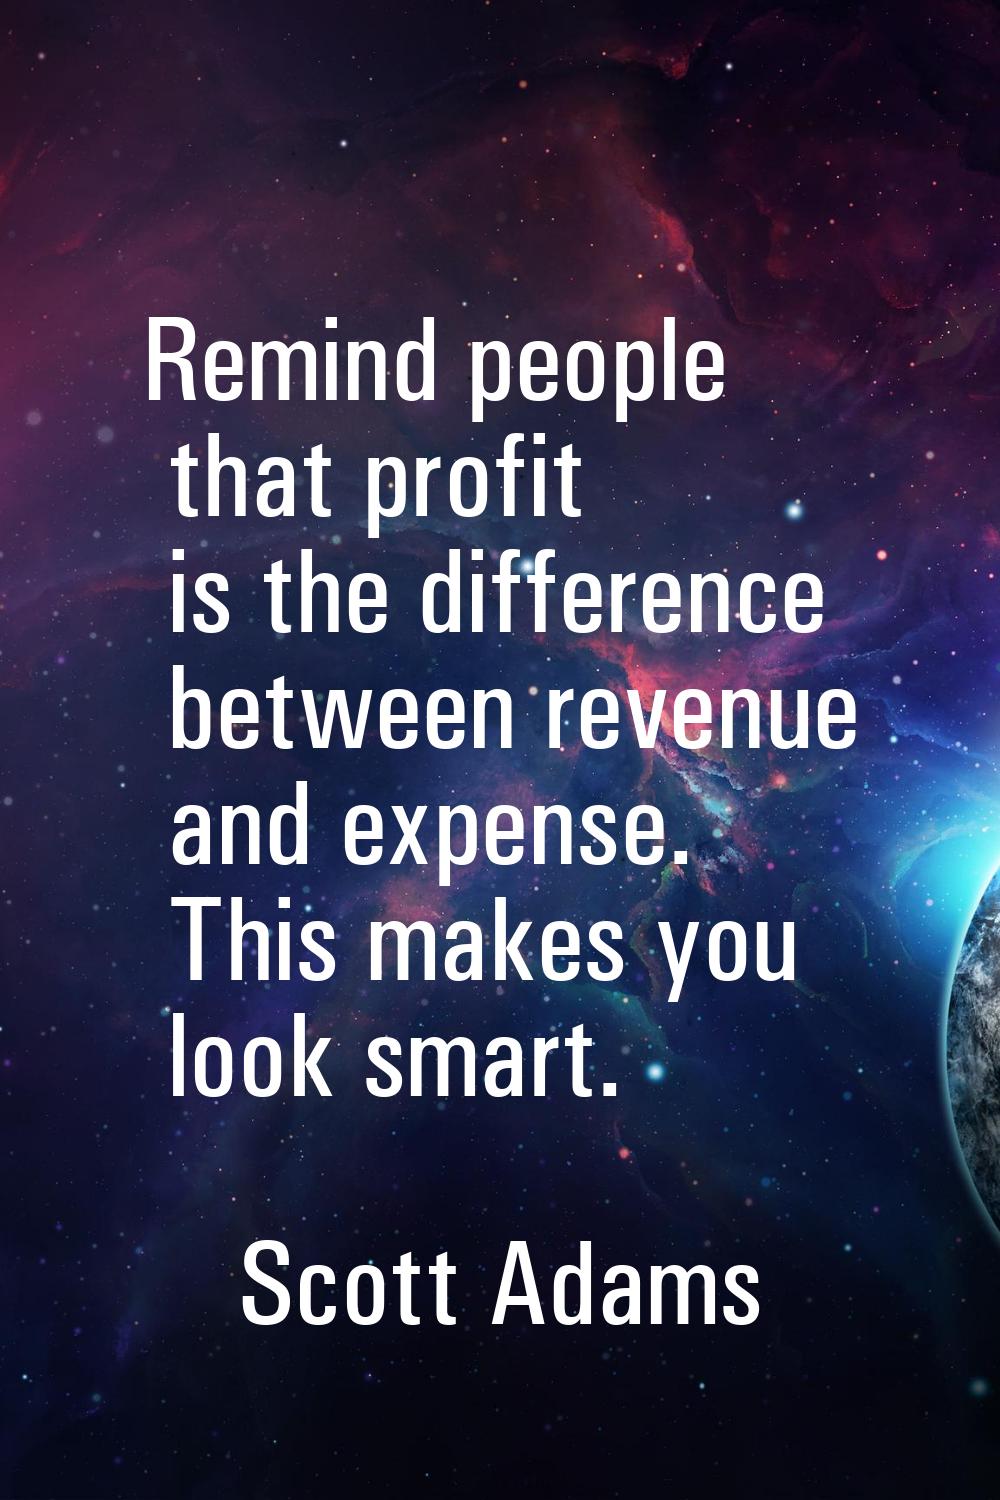 Remind people that profit is the difference between revenue and expense. This makes you look smart.